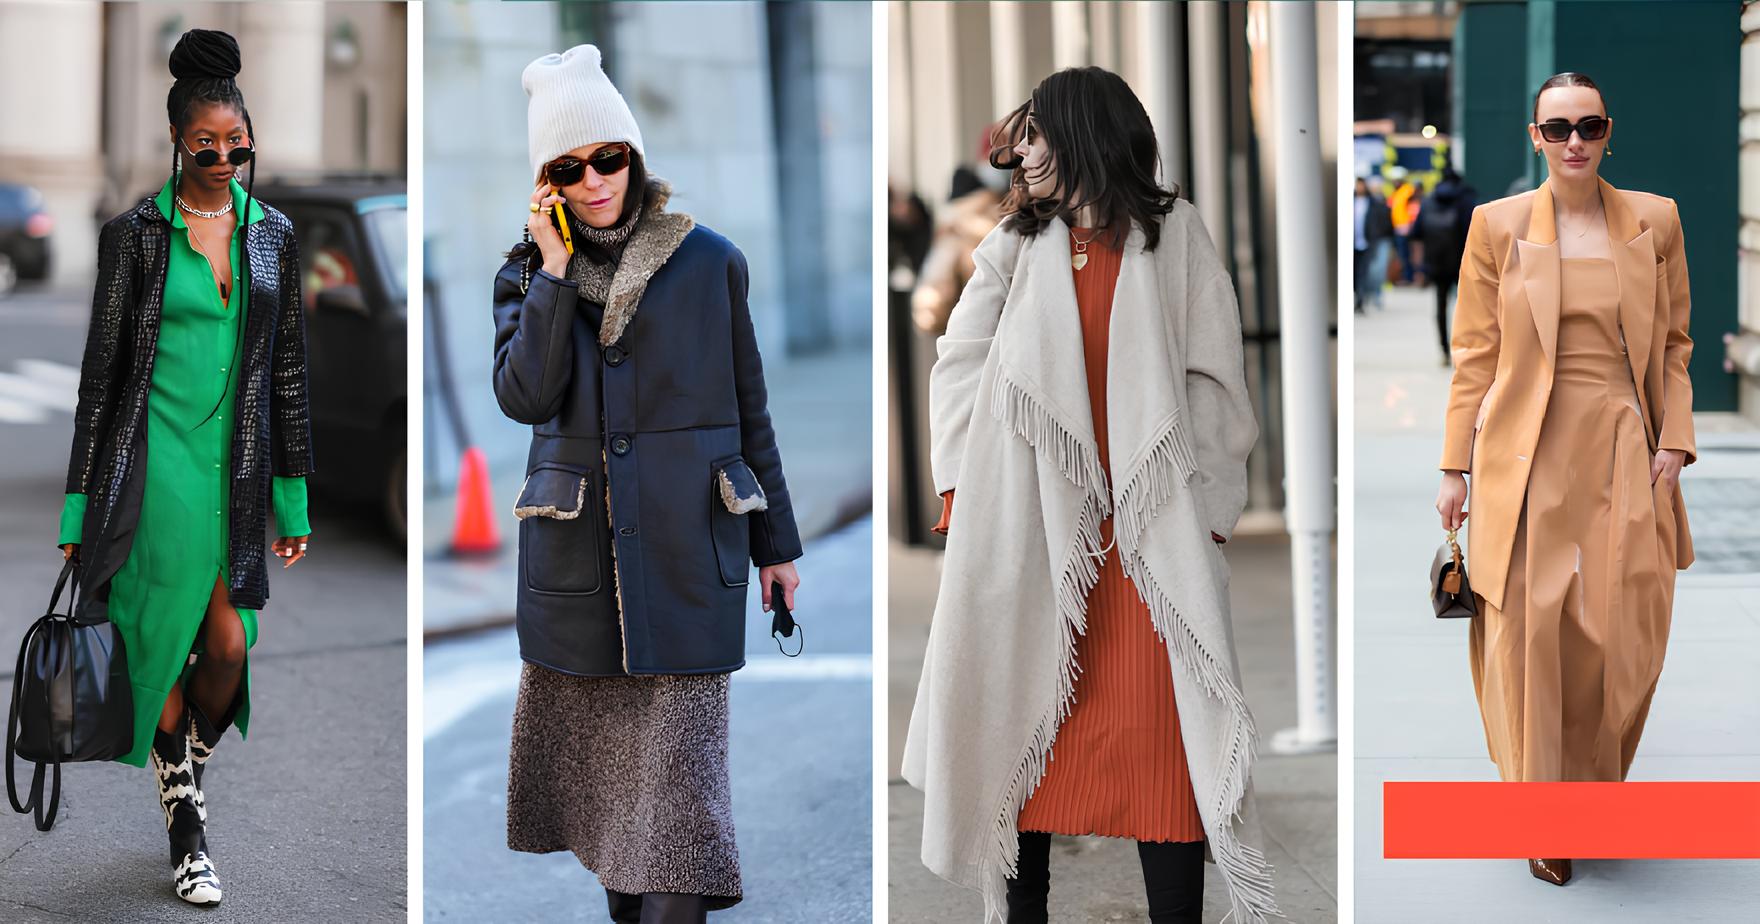 Balancing Comfort and Style in Your Winter Outfits